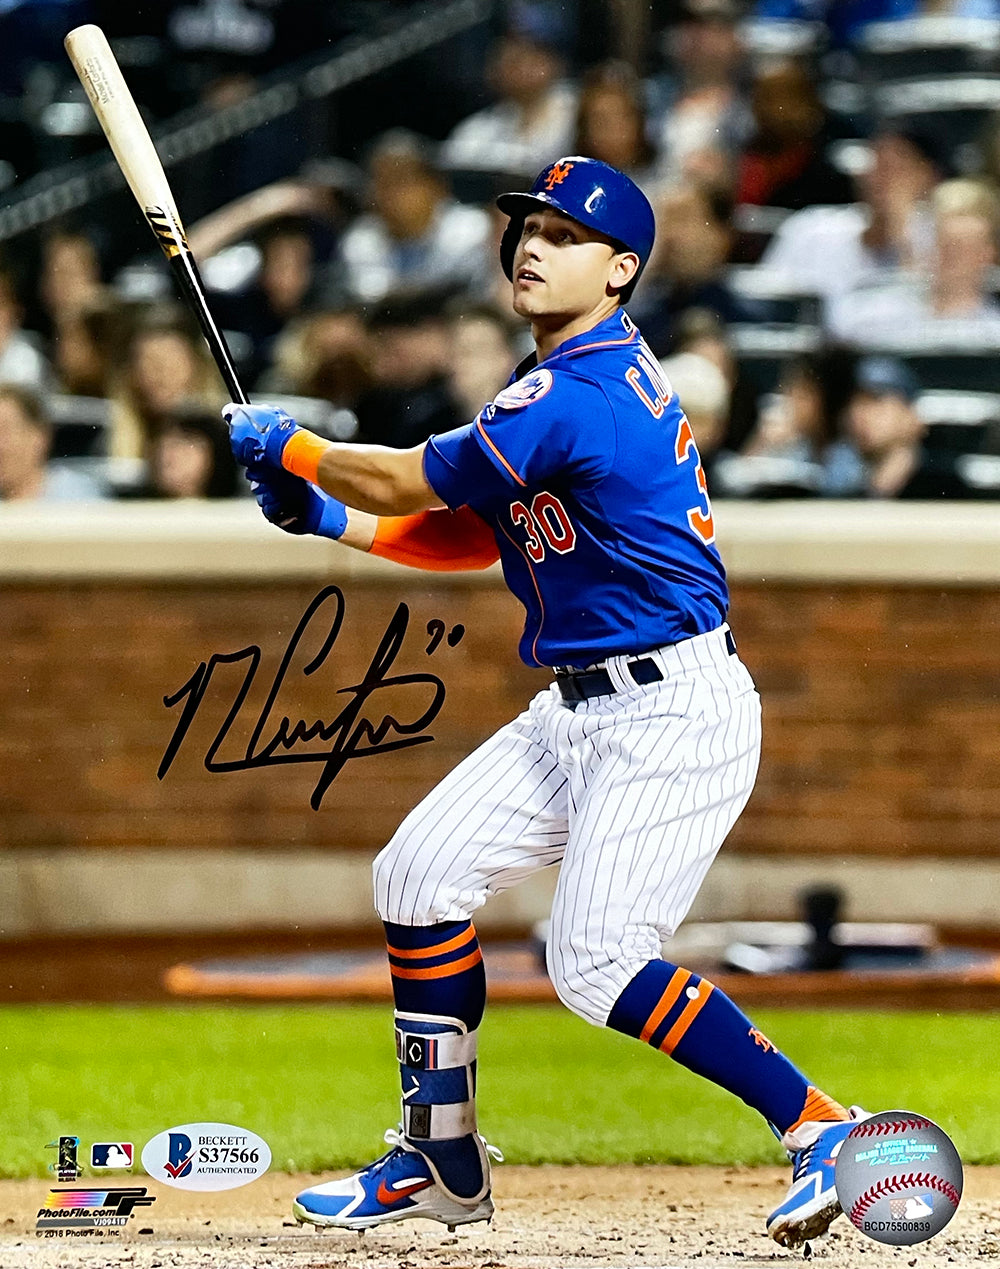 Michael Conforto Jersey – Collection Connection